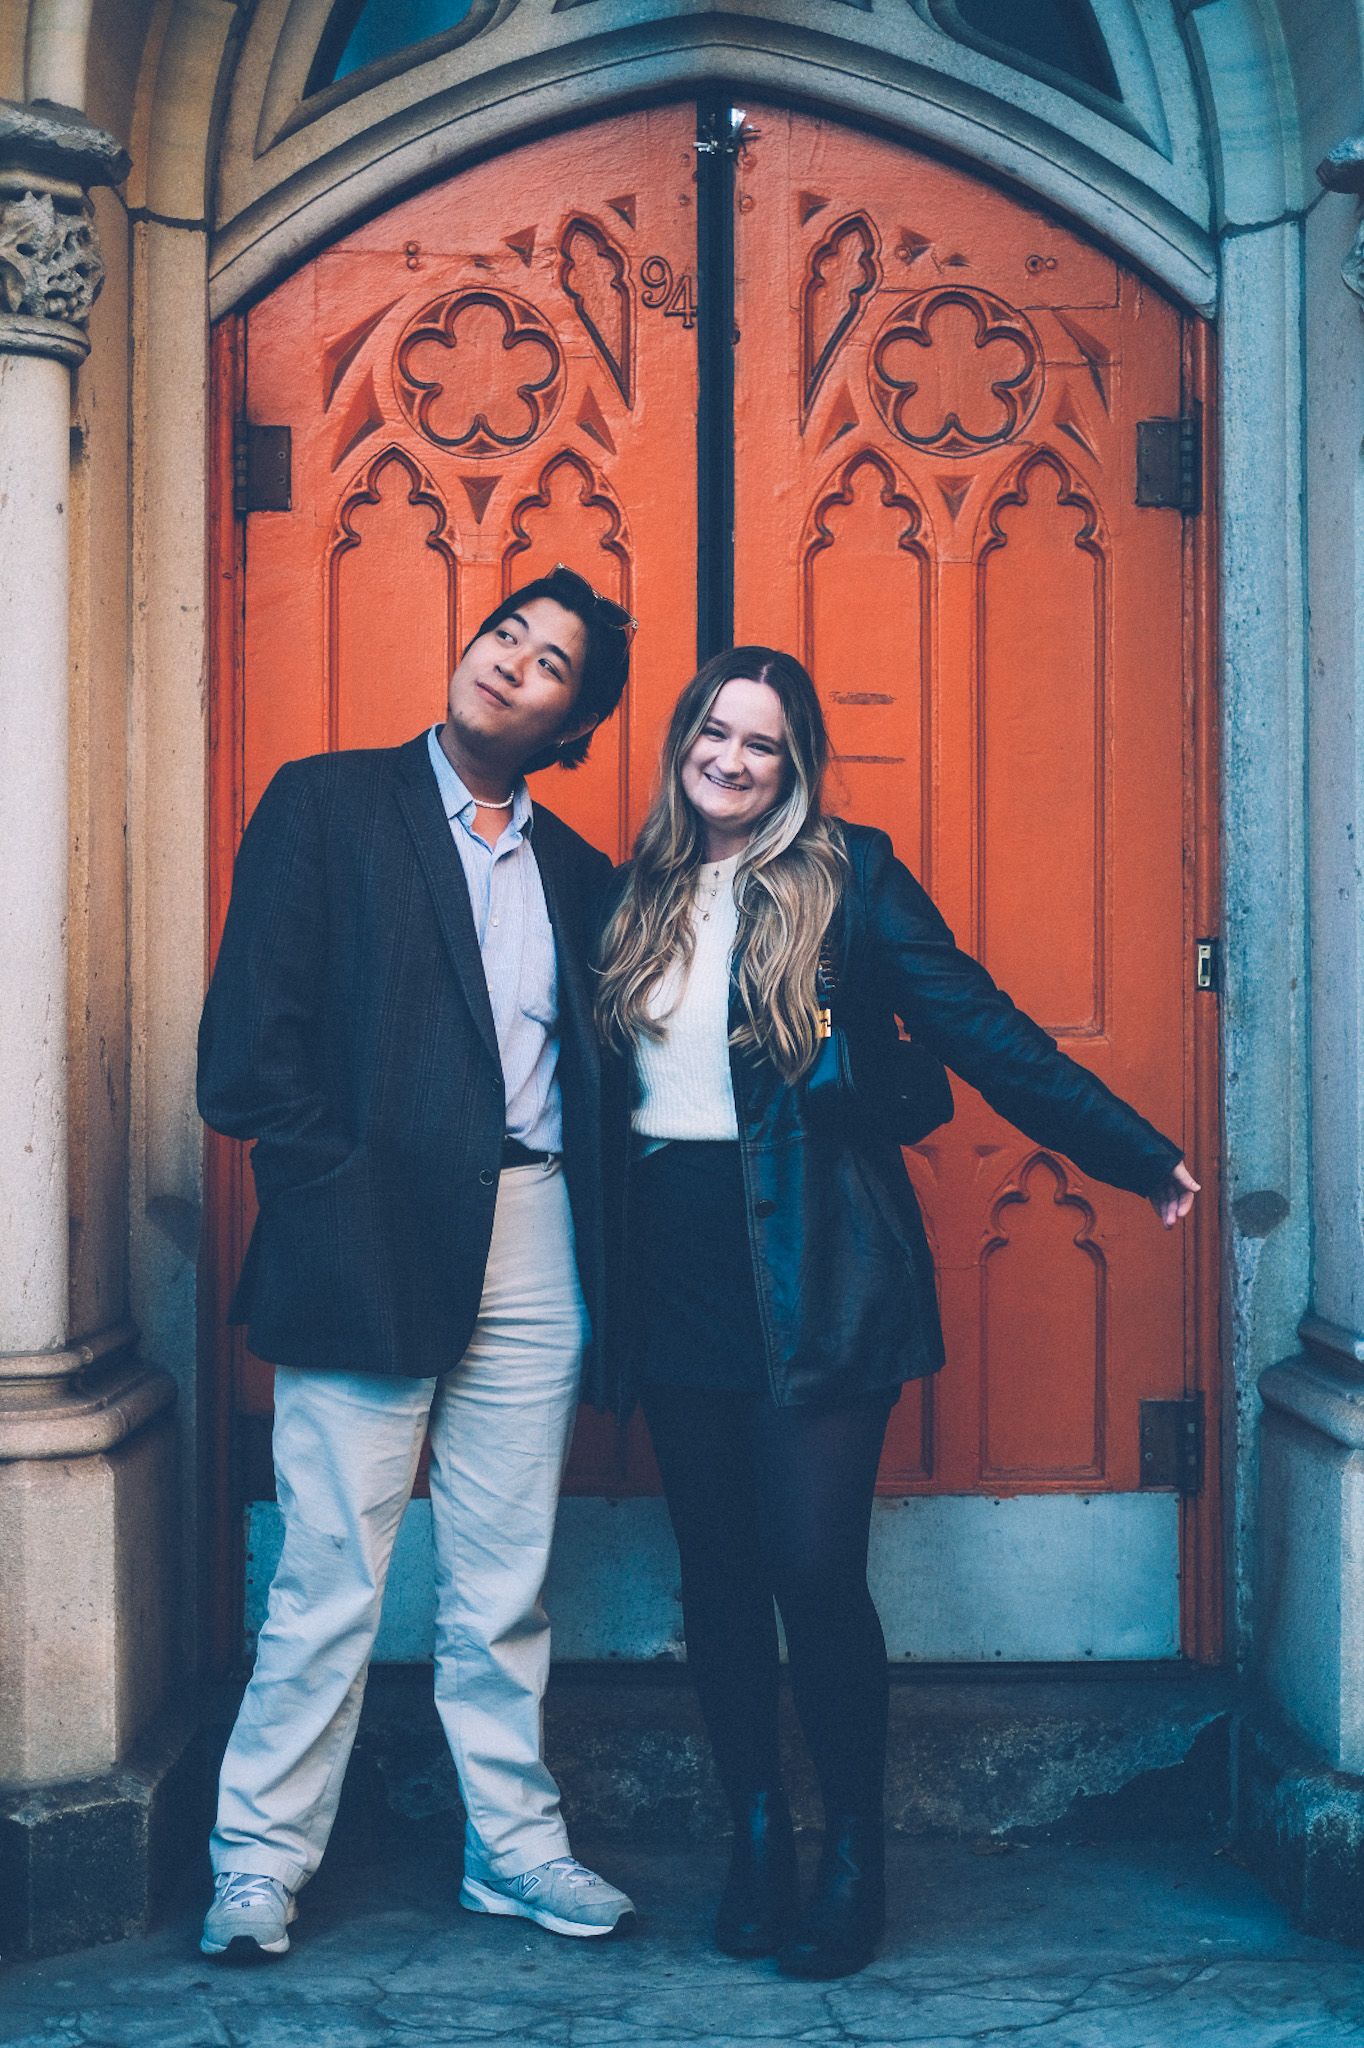 Two people stand smiling in front of a bright orange door of what looks to be a church, decorated with woodcut patterns.